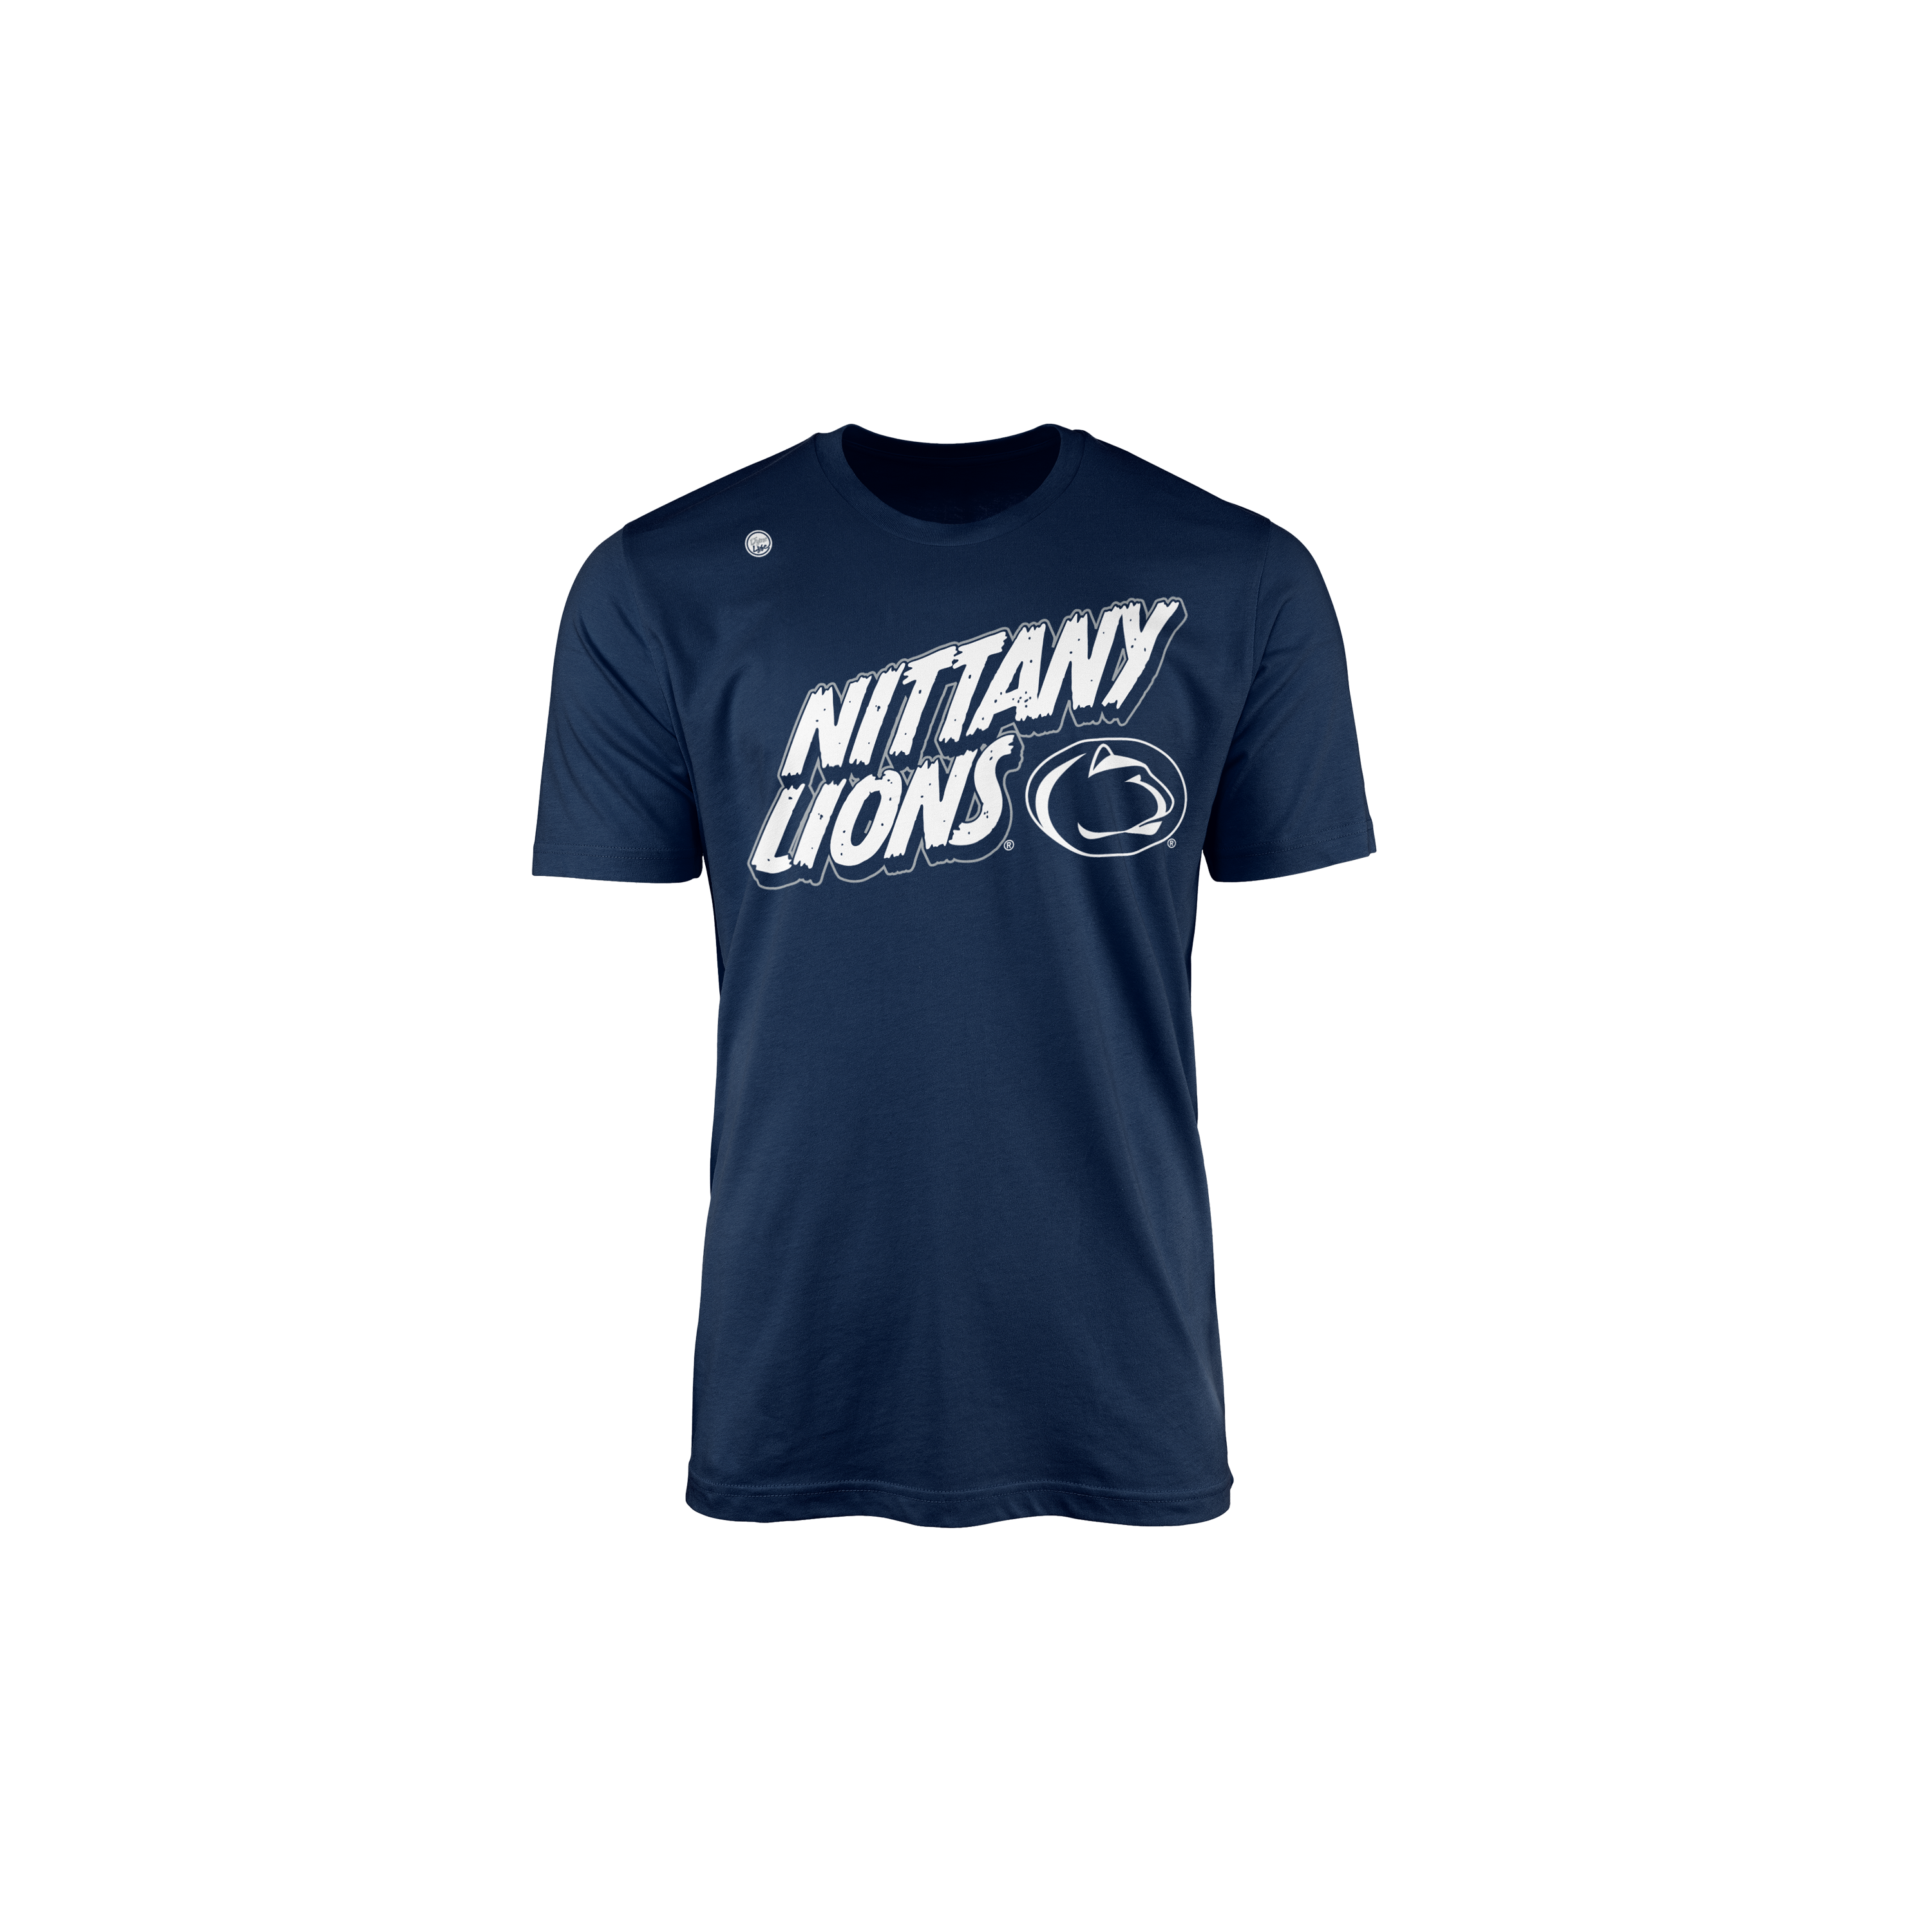 Penn State Nittany Lions Youth Tee